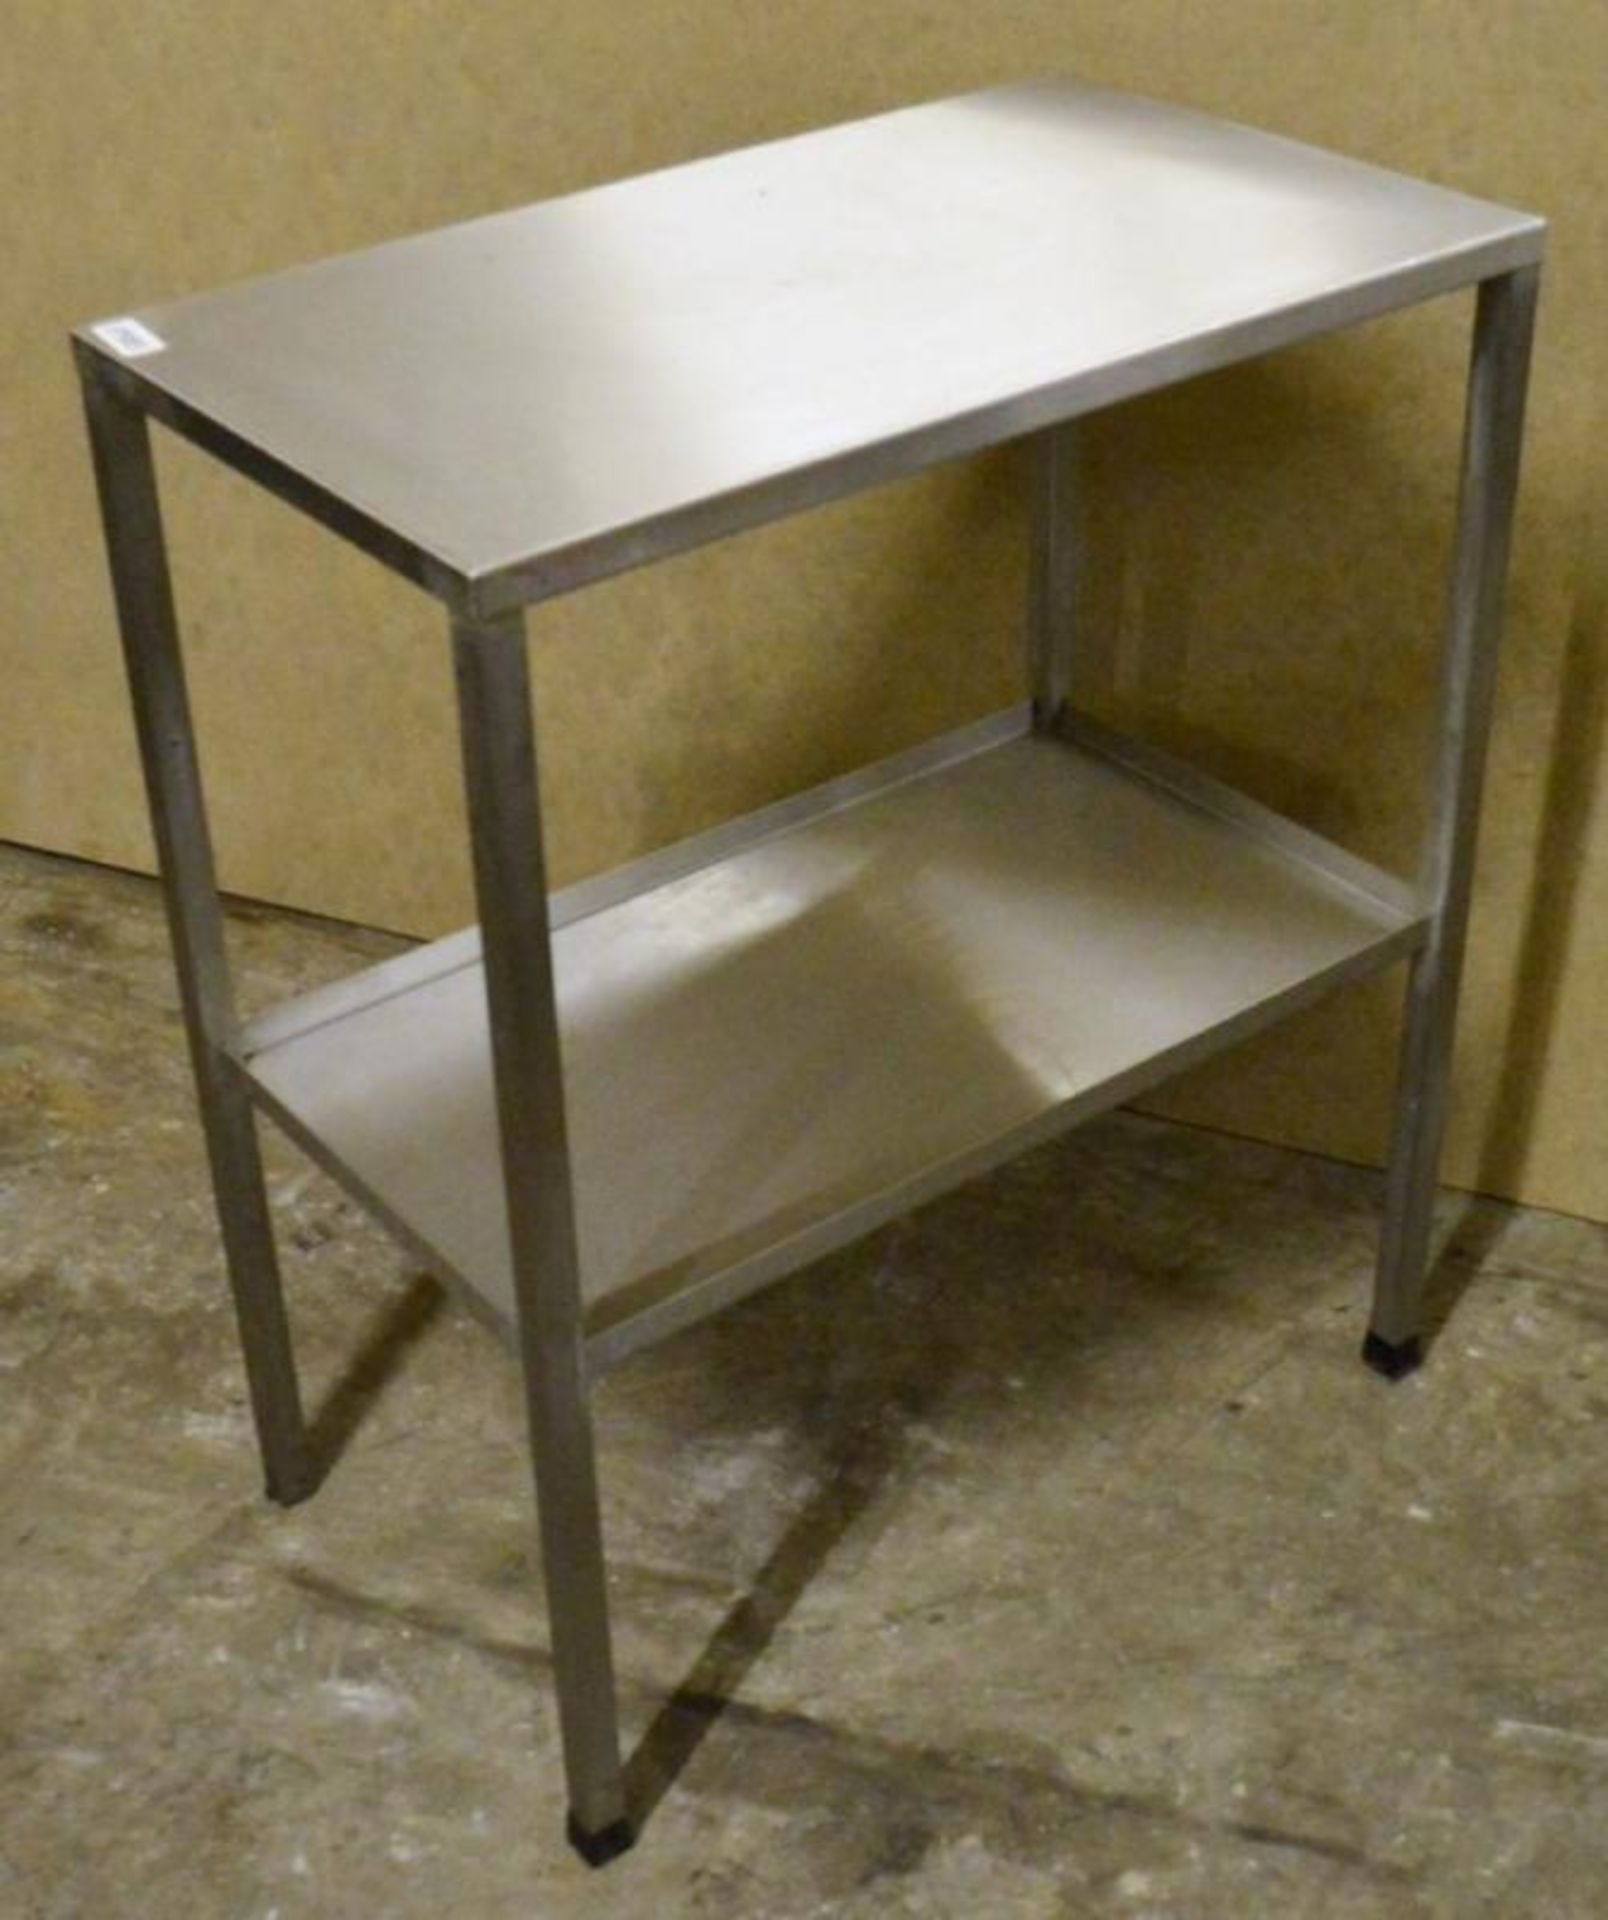 1 x Stainless Steel Prep Table With Undershelf - H83 x W40 x D70 cms - CL282 - Ref JP985 - Location: